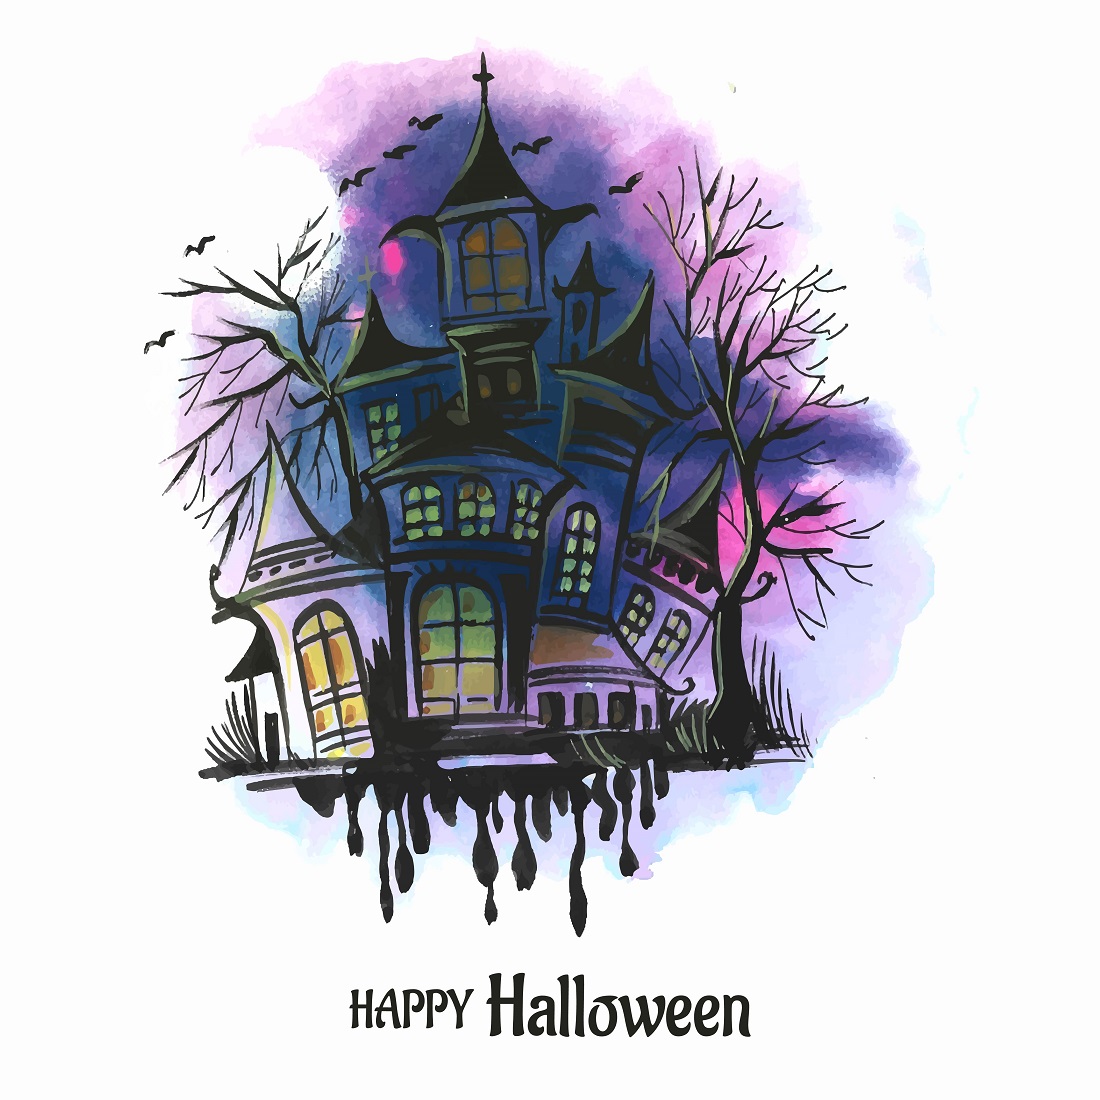 Halloween spooky house watercolor background cover image.